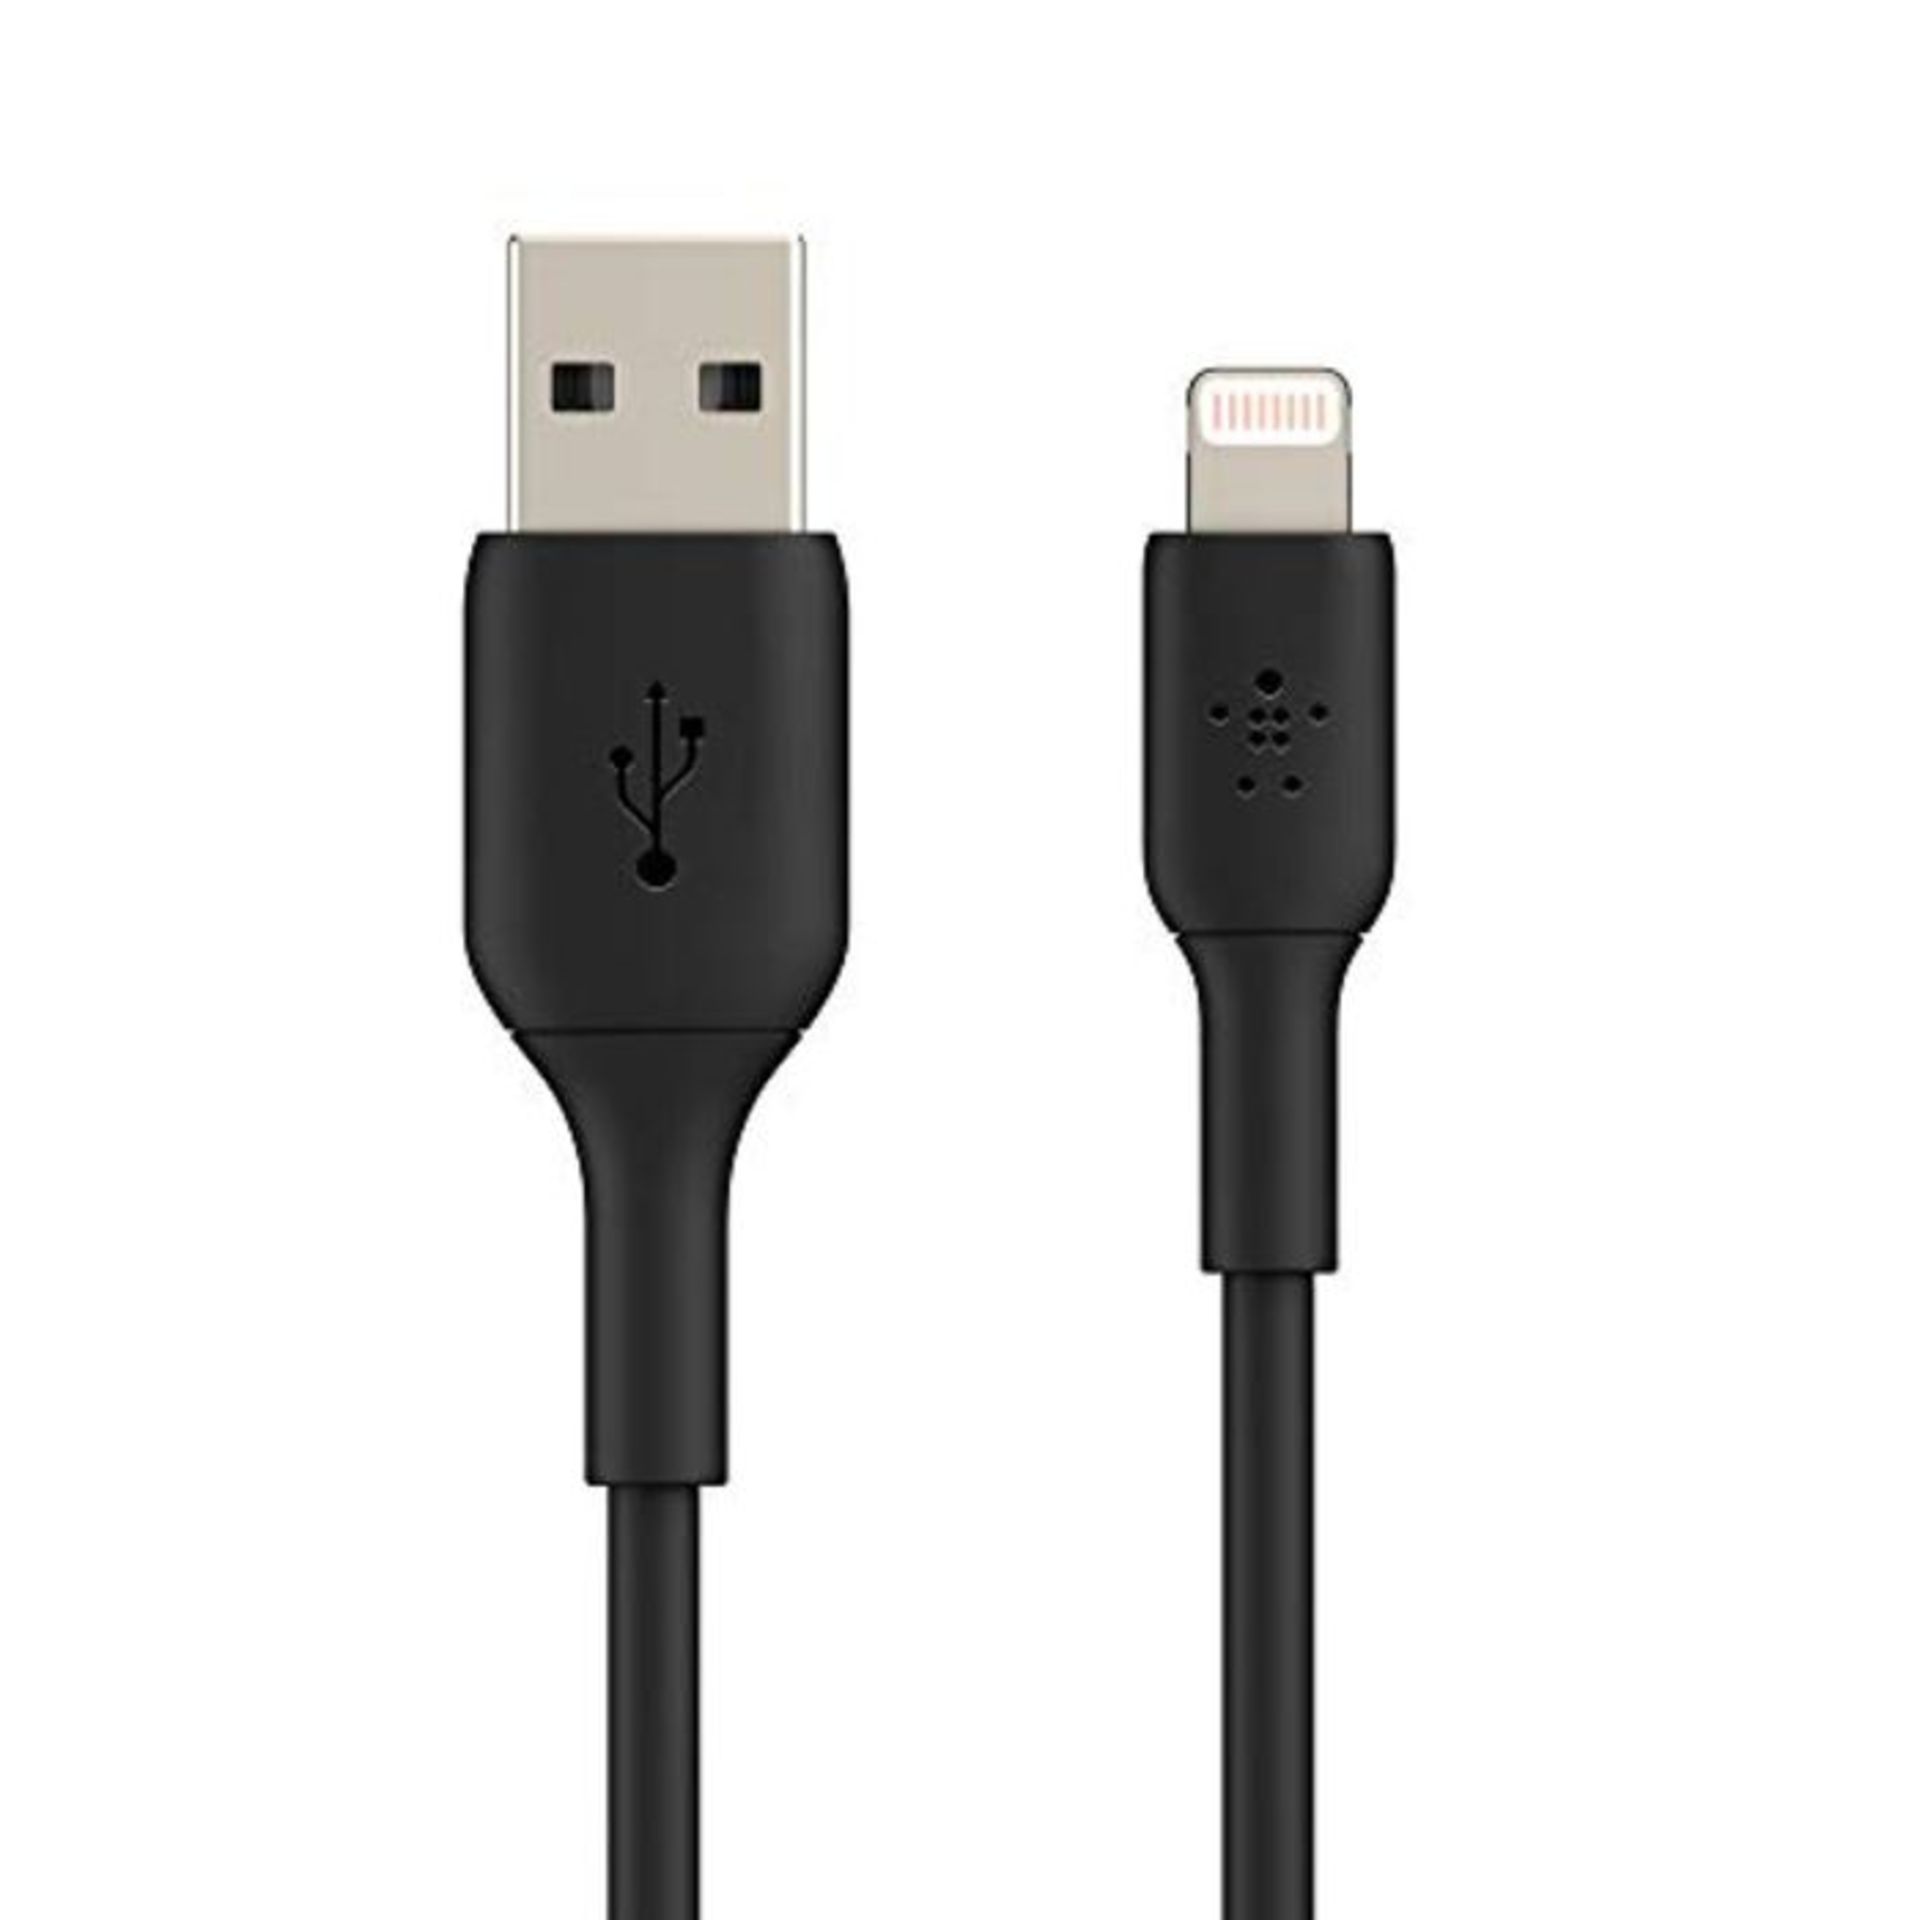 Belkin Lightning Cable (Boost Charge Lightning to USB Cable for iPhone, iPad, AirPods)